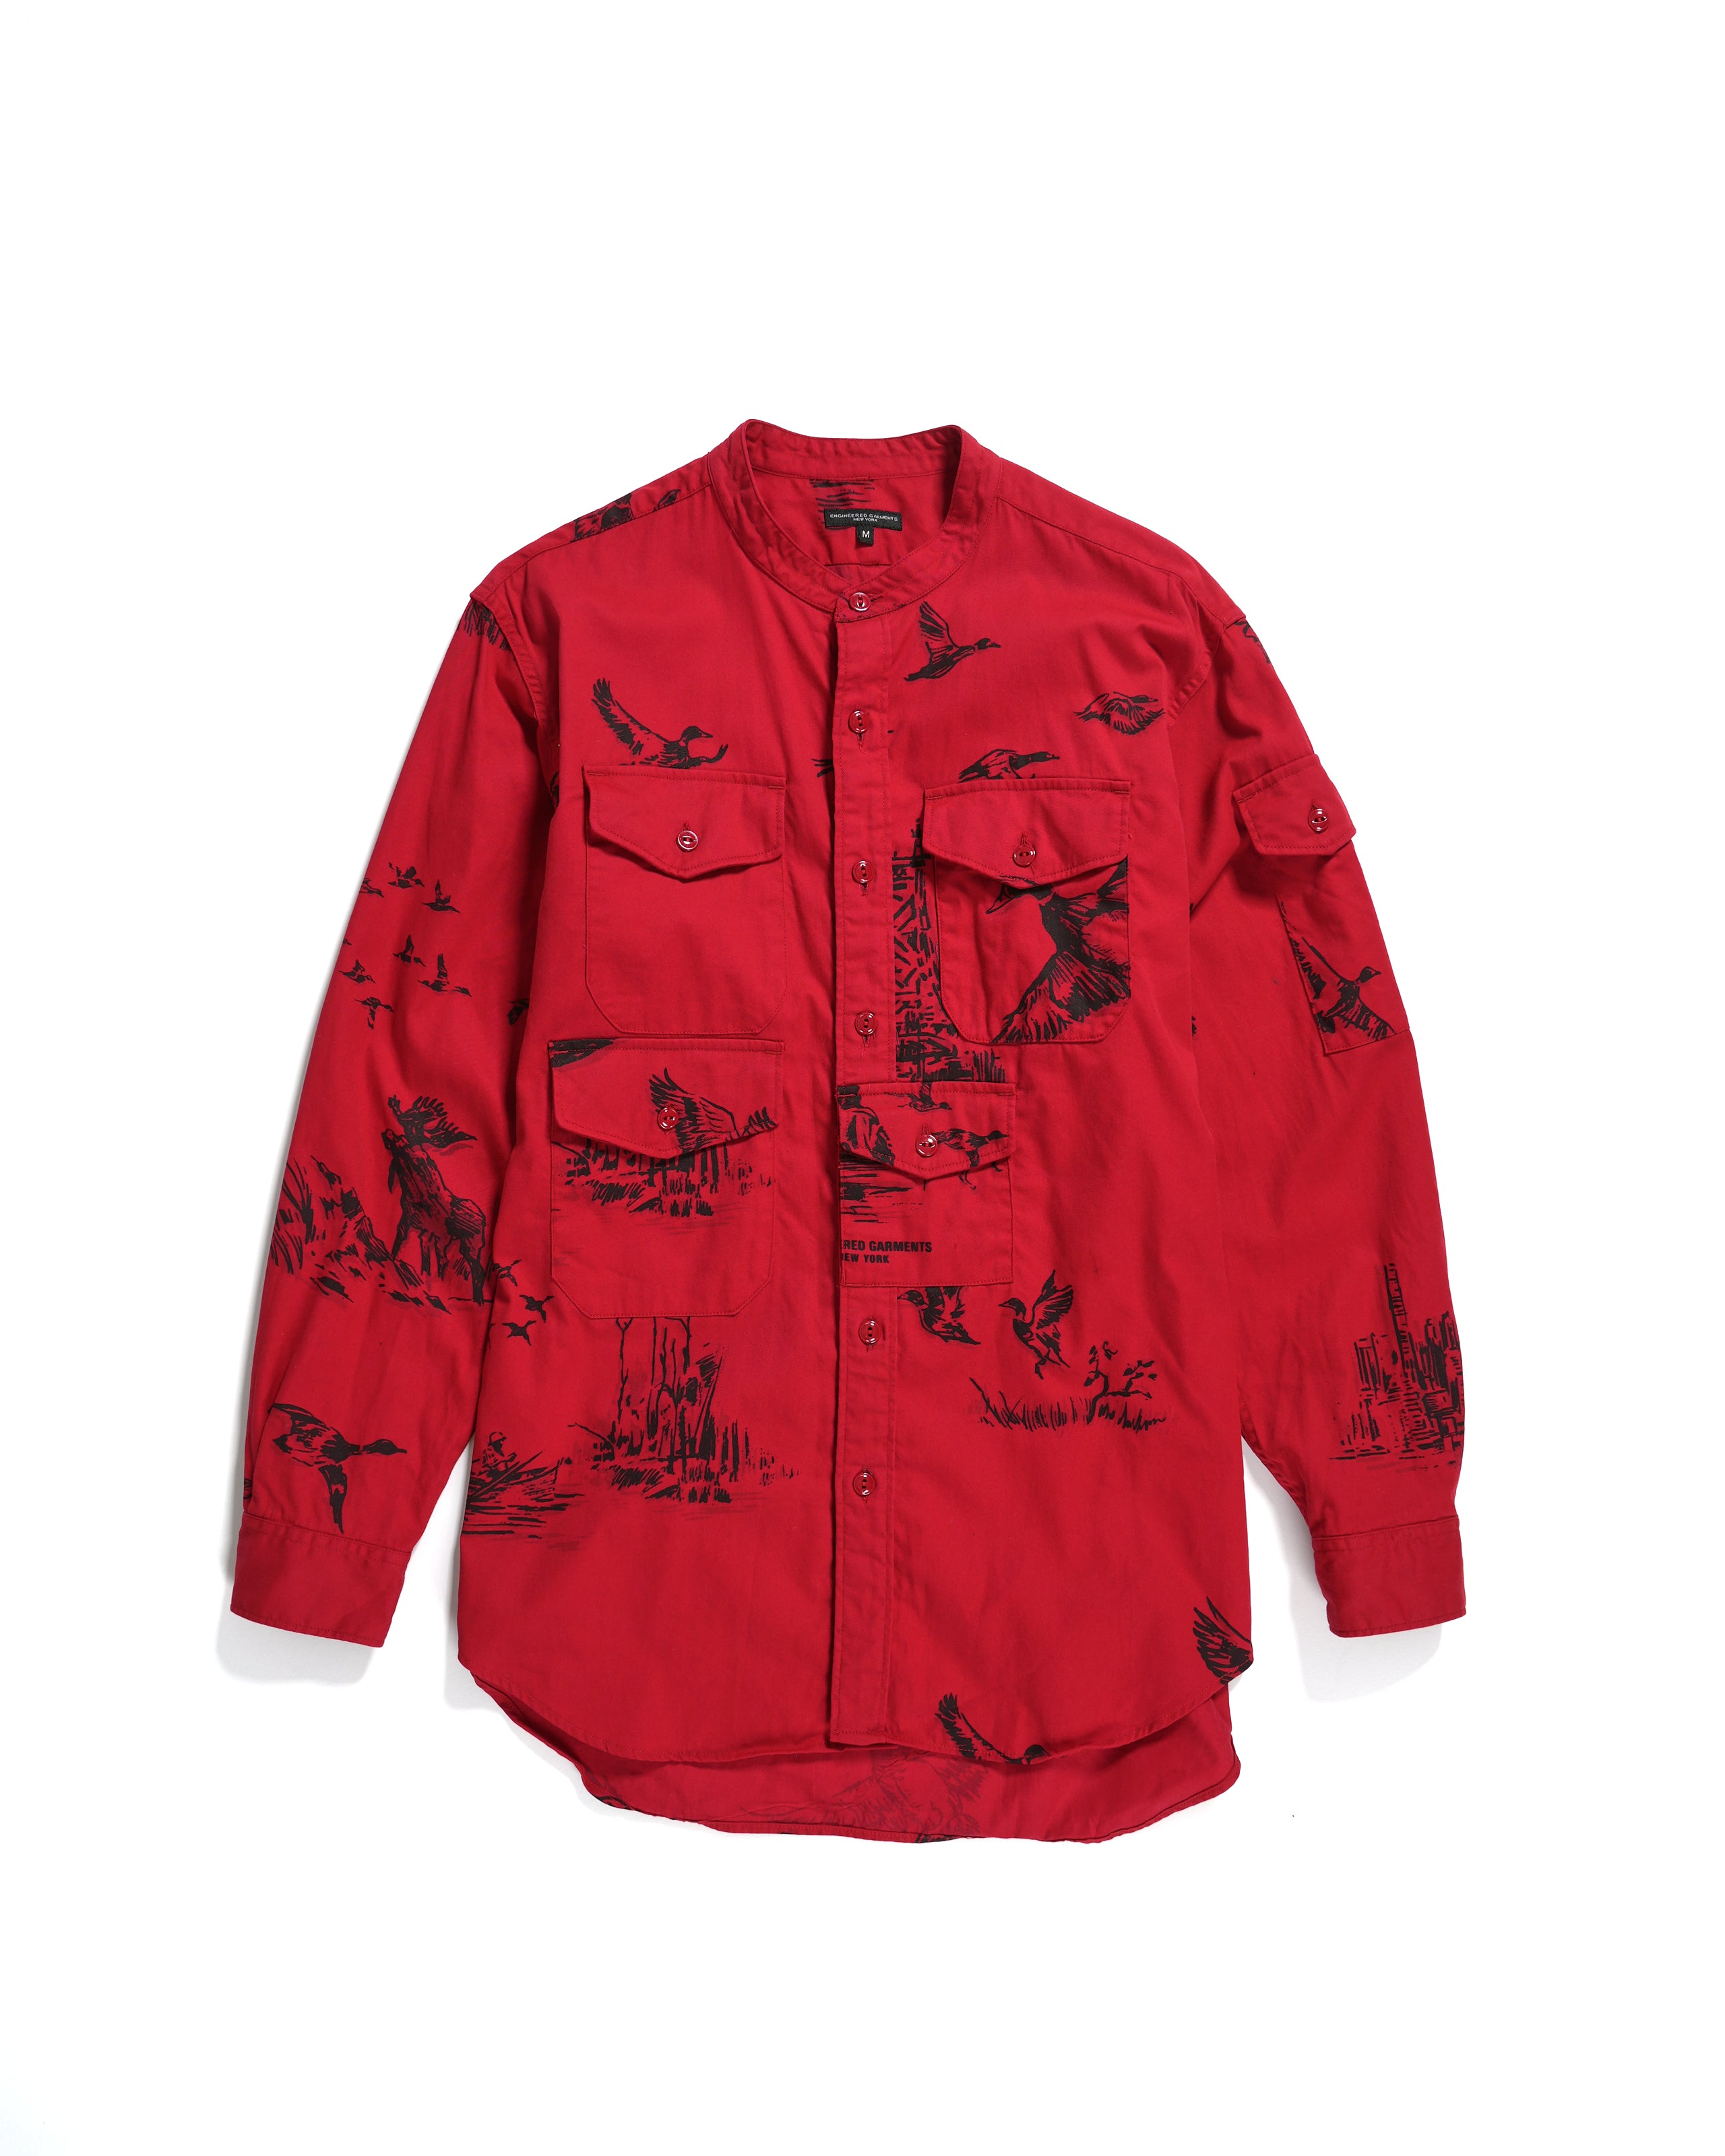 North Western Shirt - Red Hunting Print French Twill